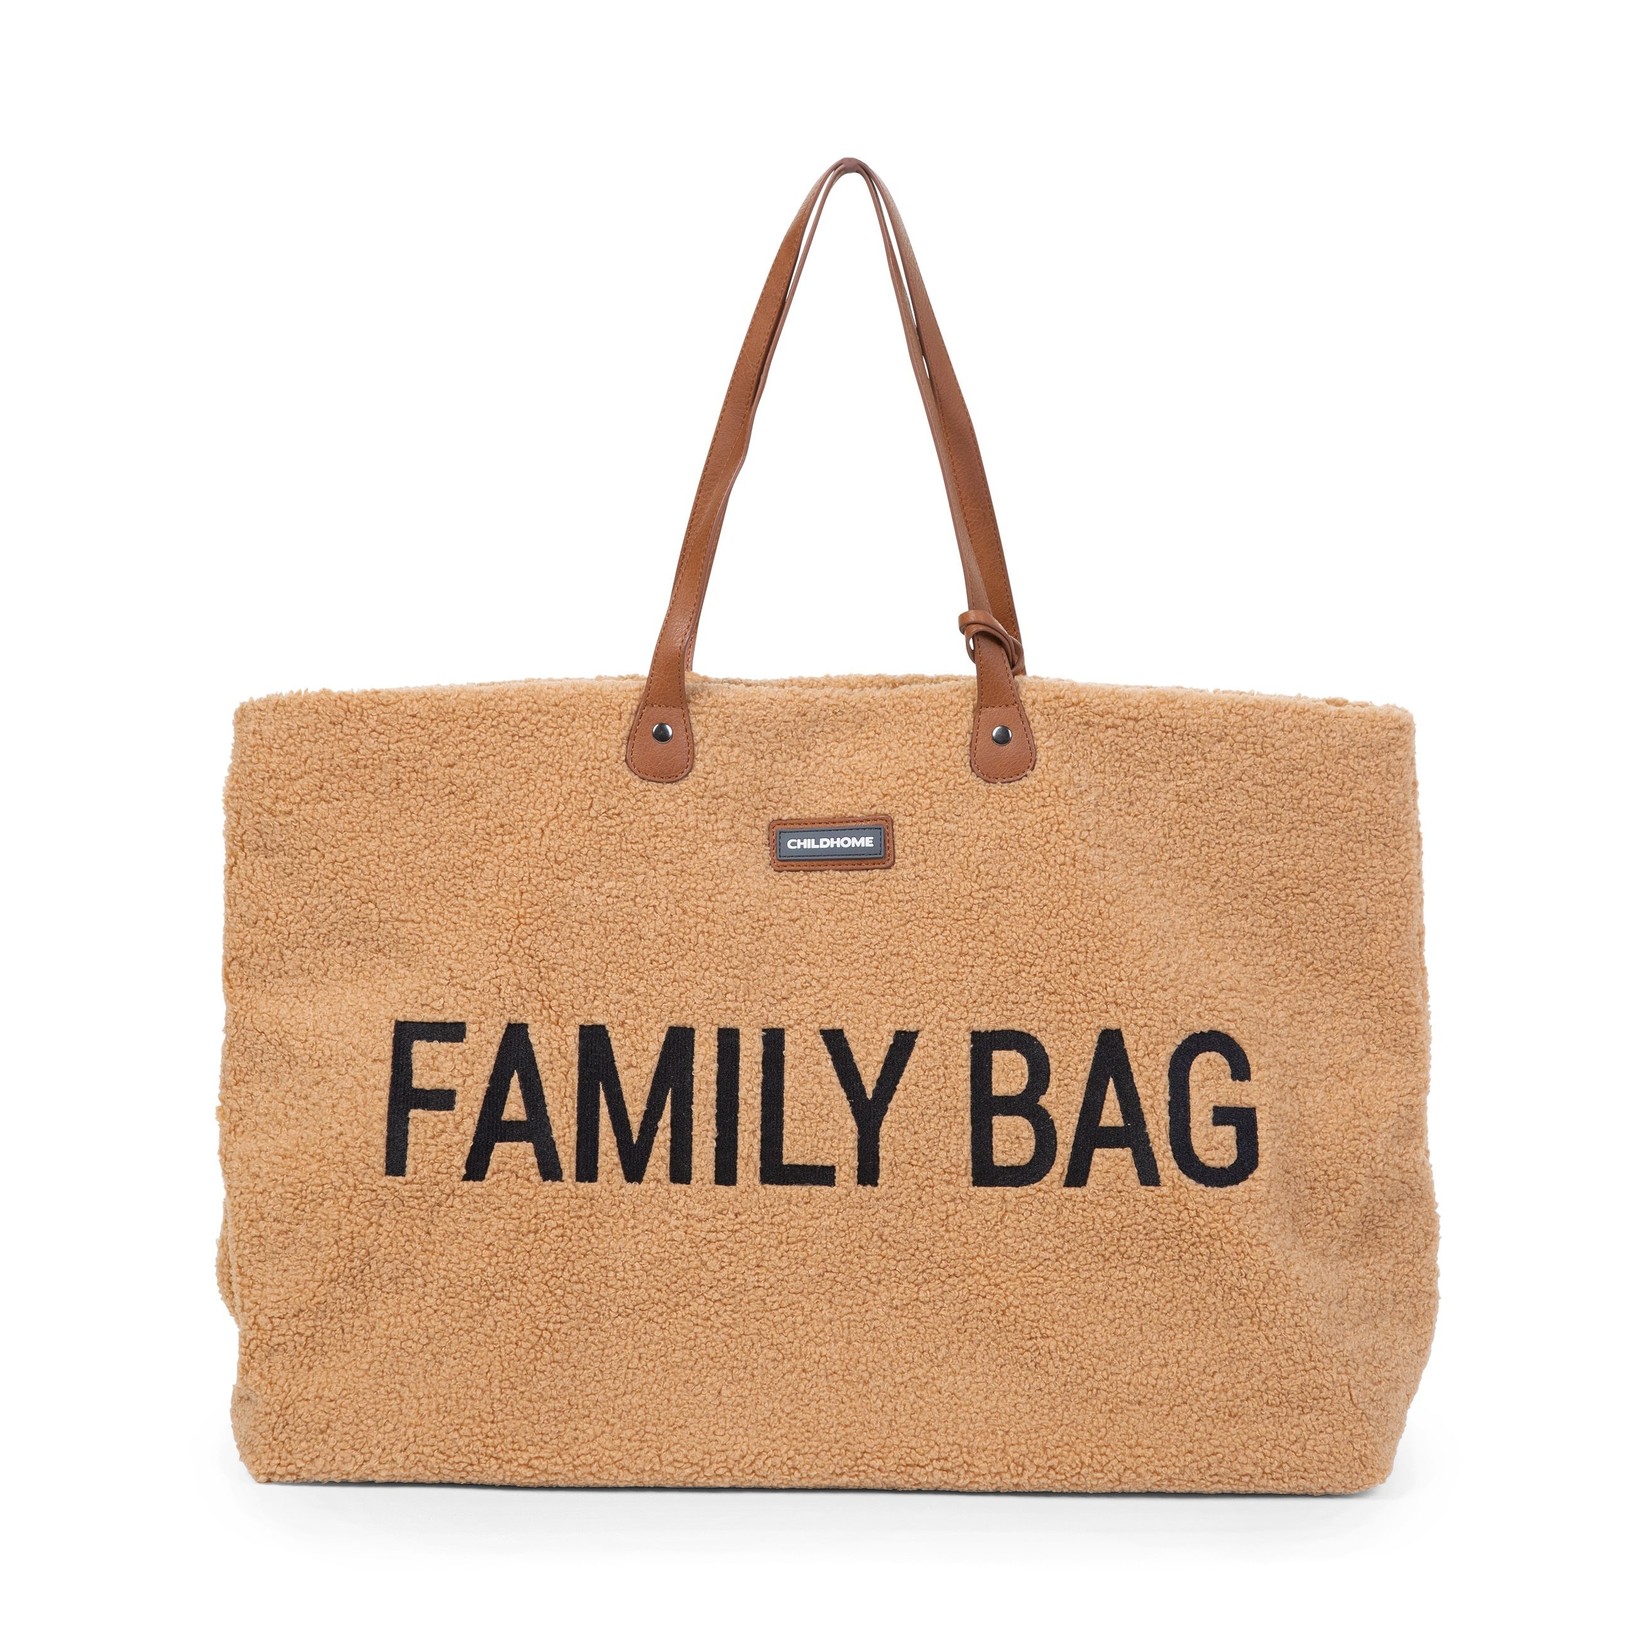 Childhome Childhome Family Bag Teddy Beige